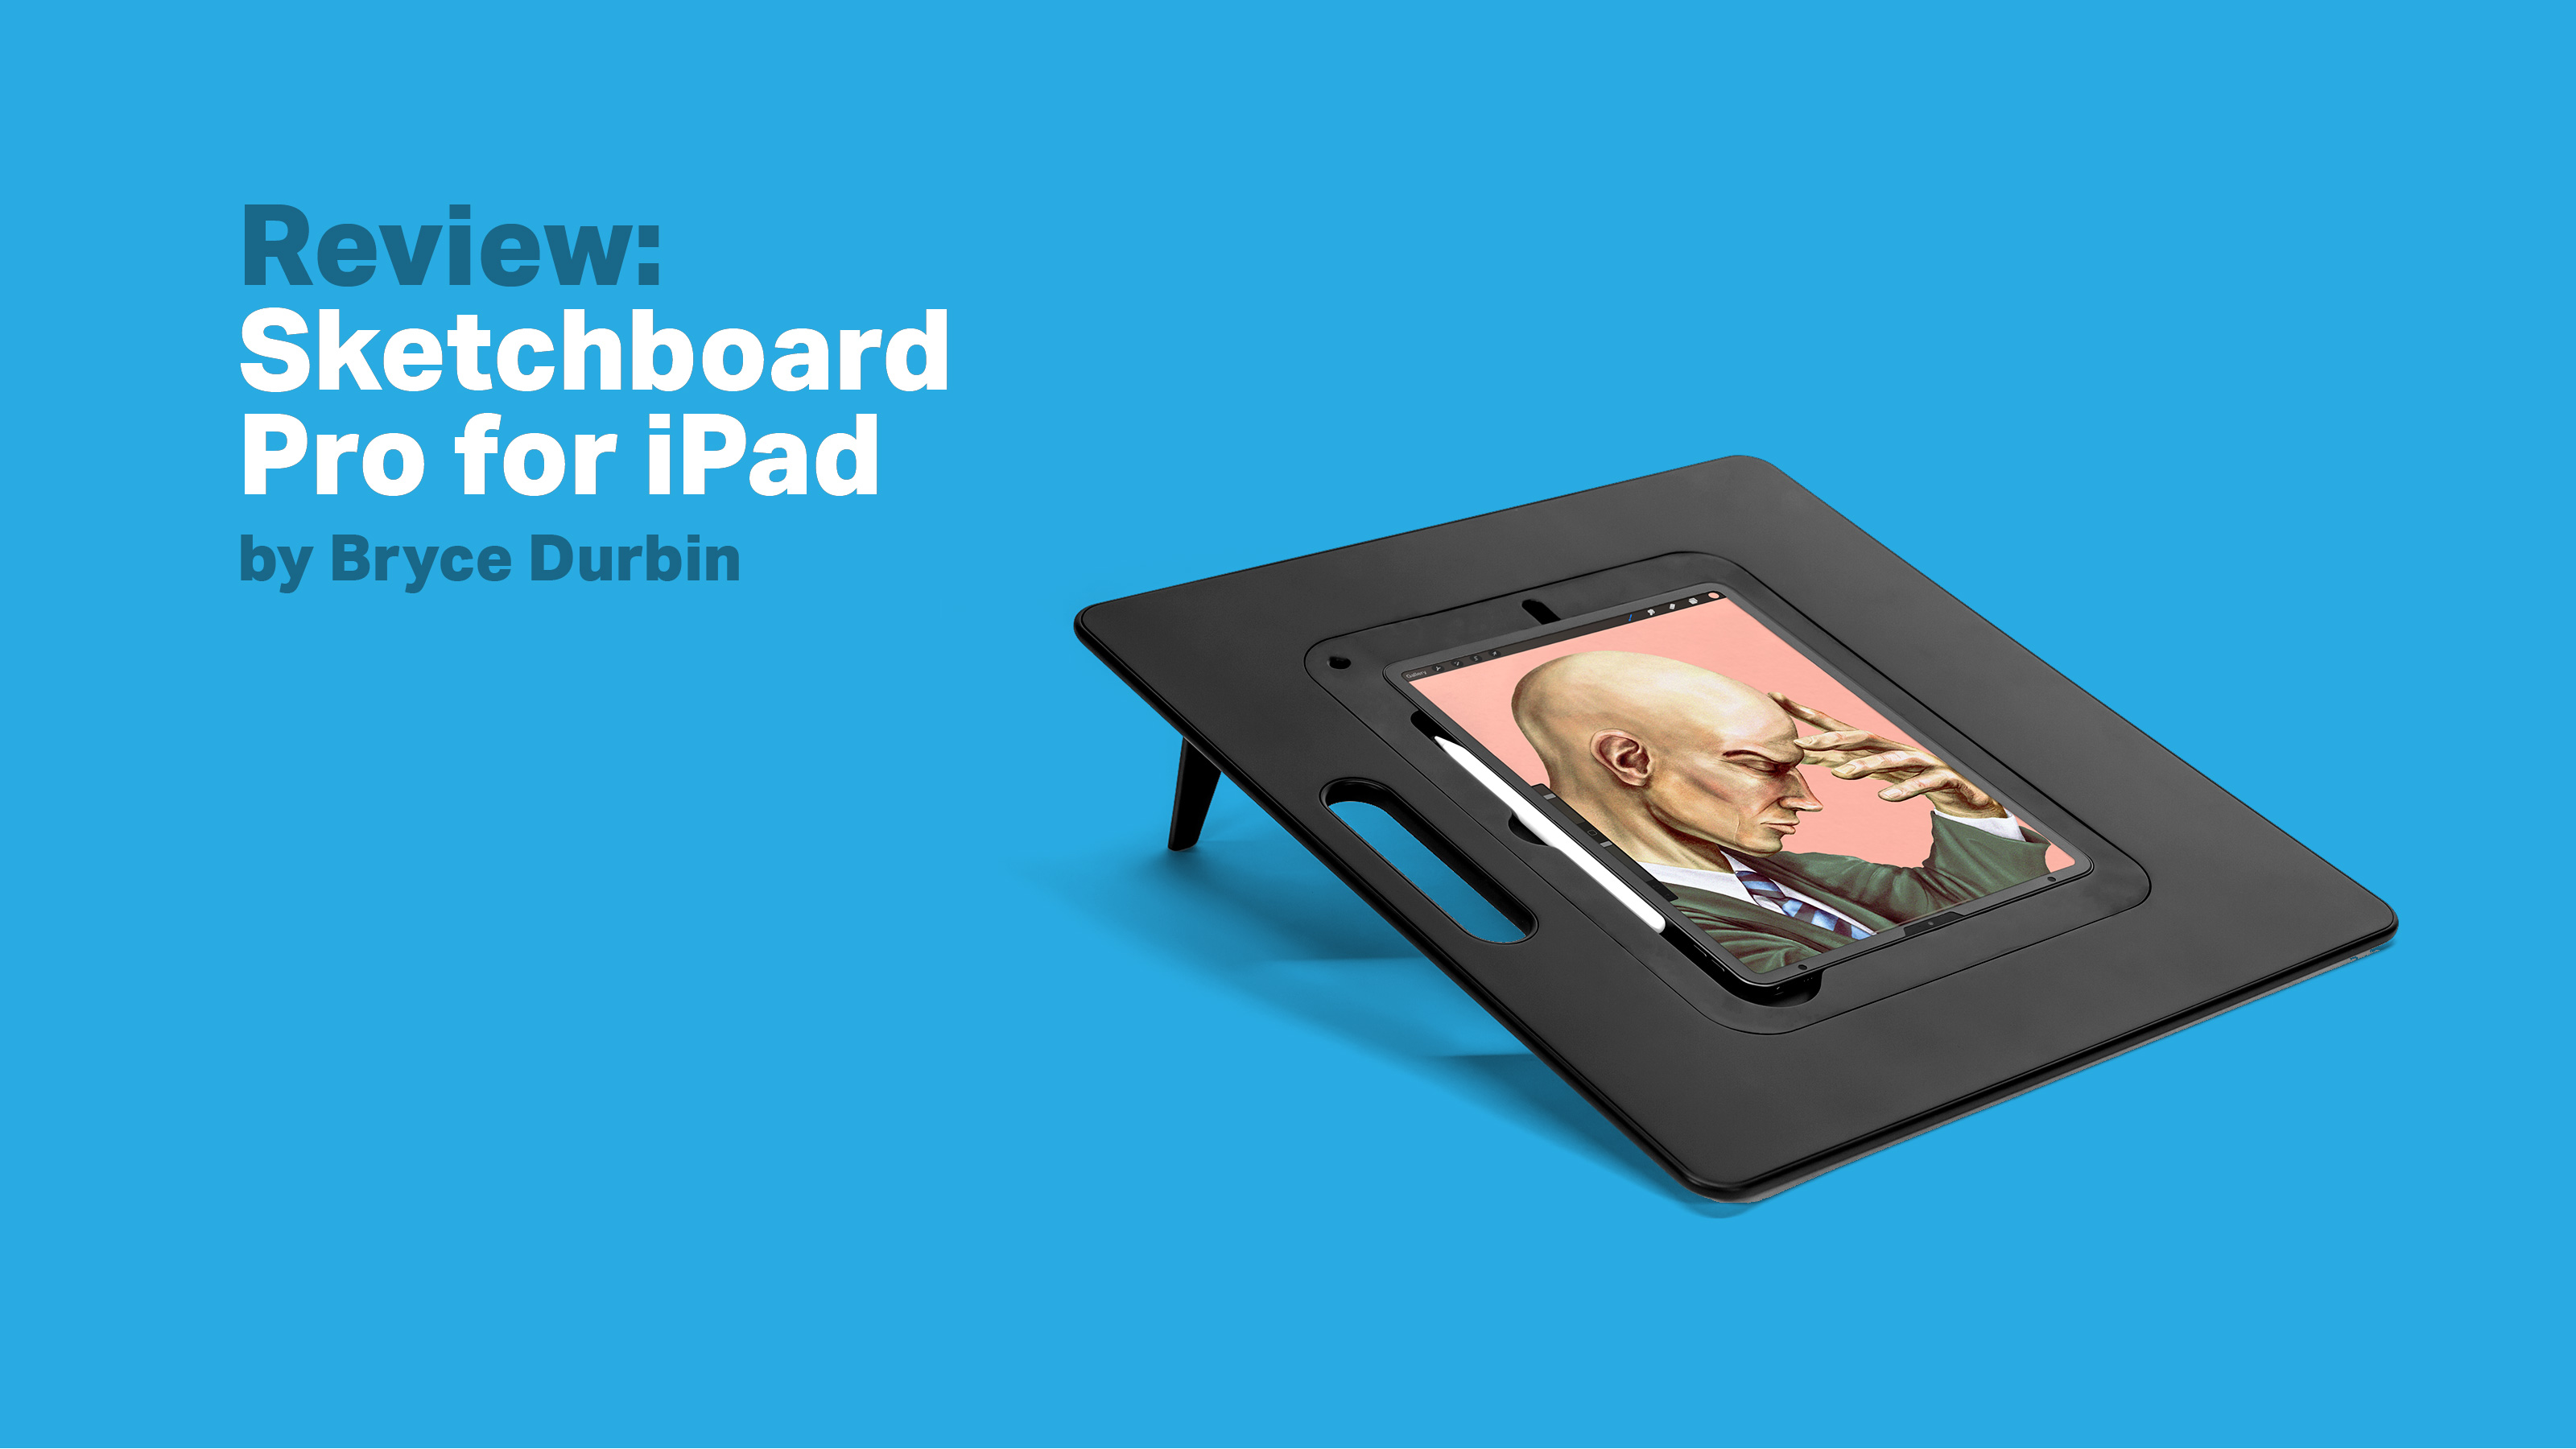 Review: Sketchboard Pro for iPad